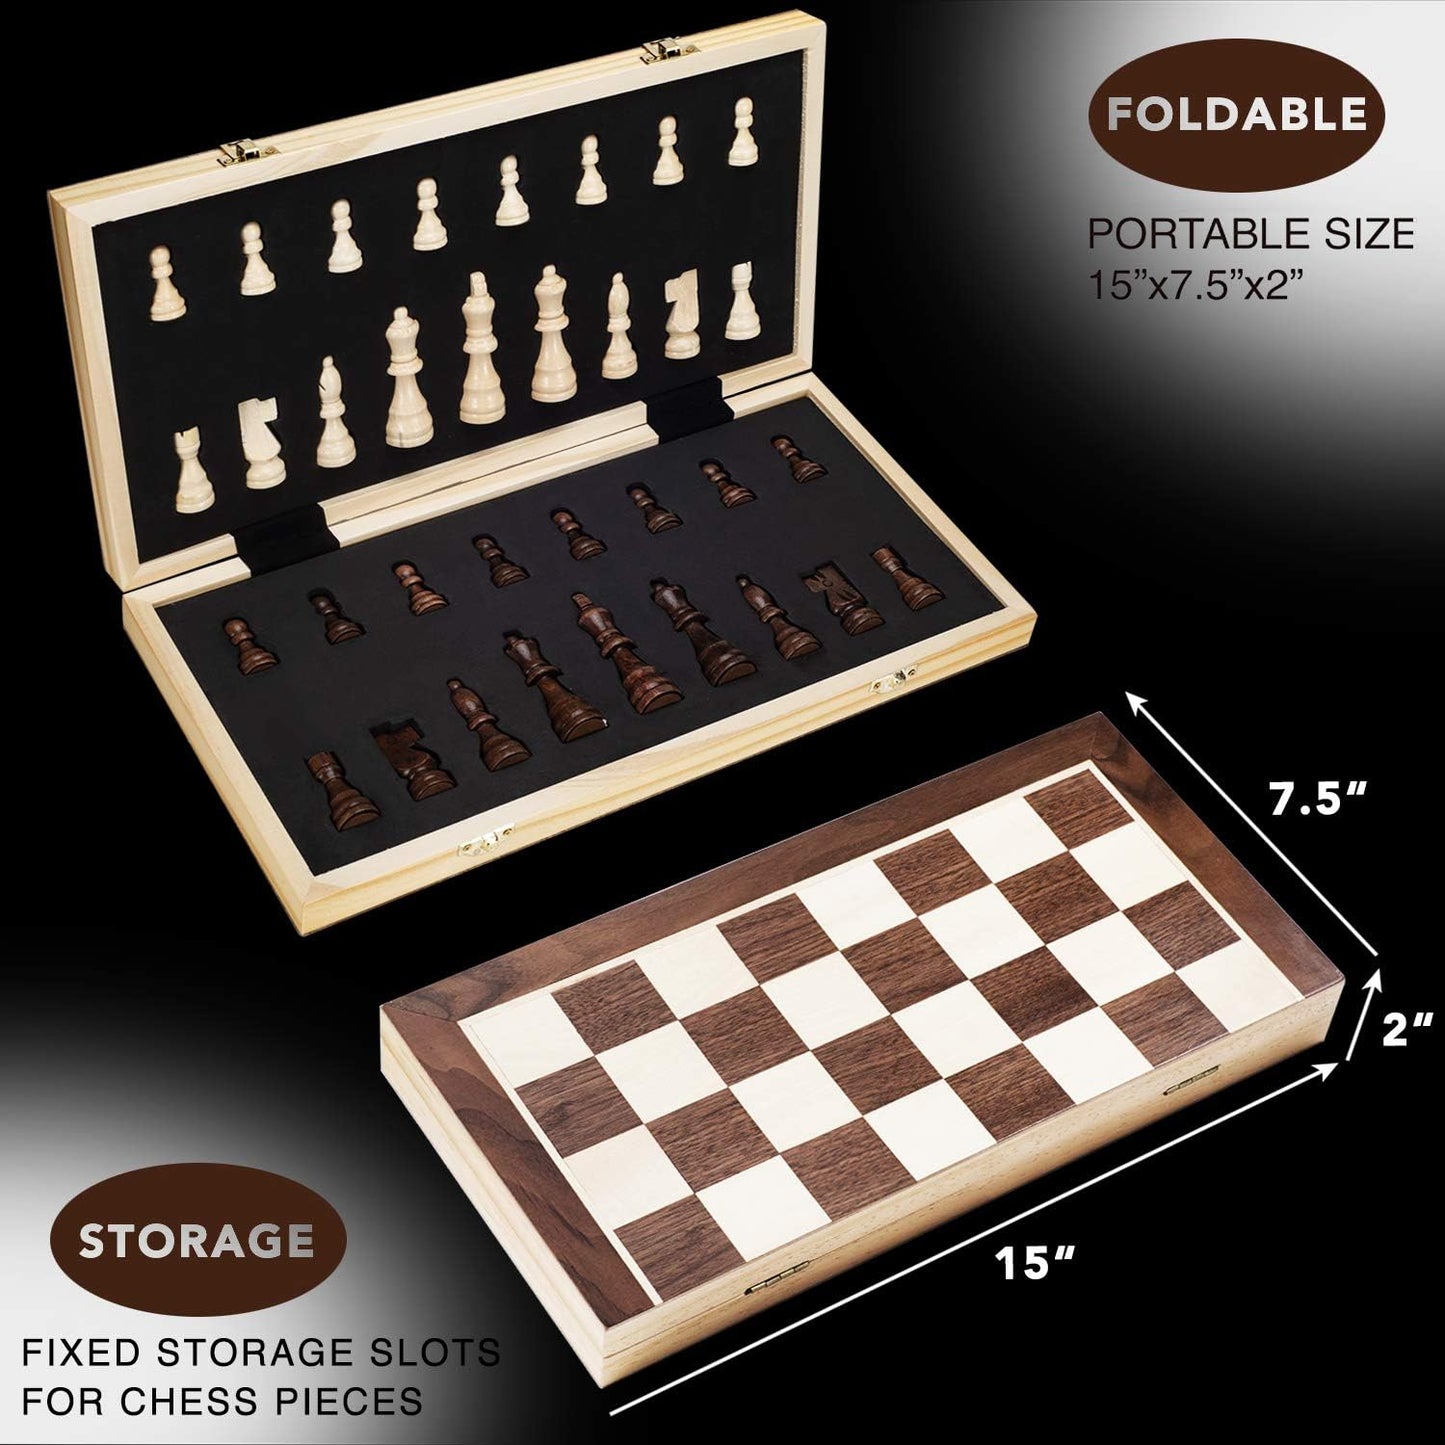 15 Inches Magnetic Wooden Chess Set - 2 Extra Queens - Folding Board, Handmade Portable Travel Chess Board Game Sets with Game Pieces Storage Slots - Beginner Chess Set for Kids and Adults